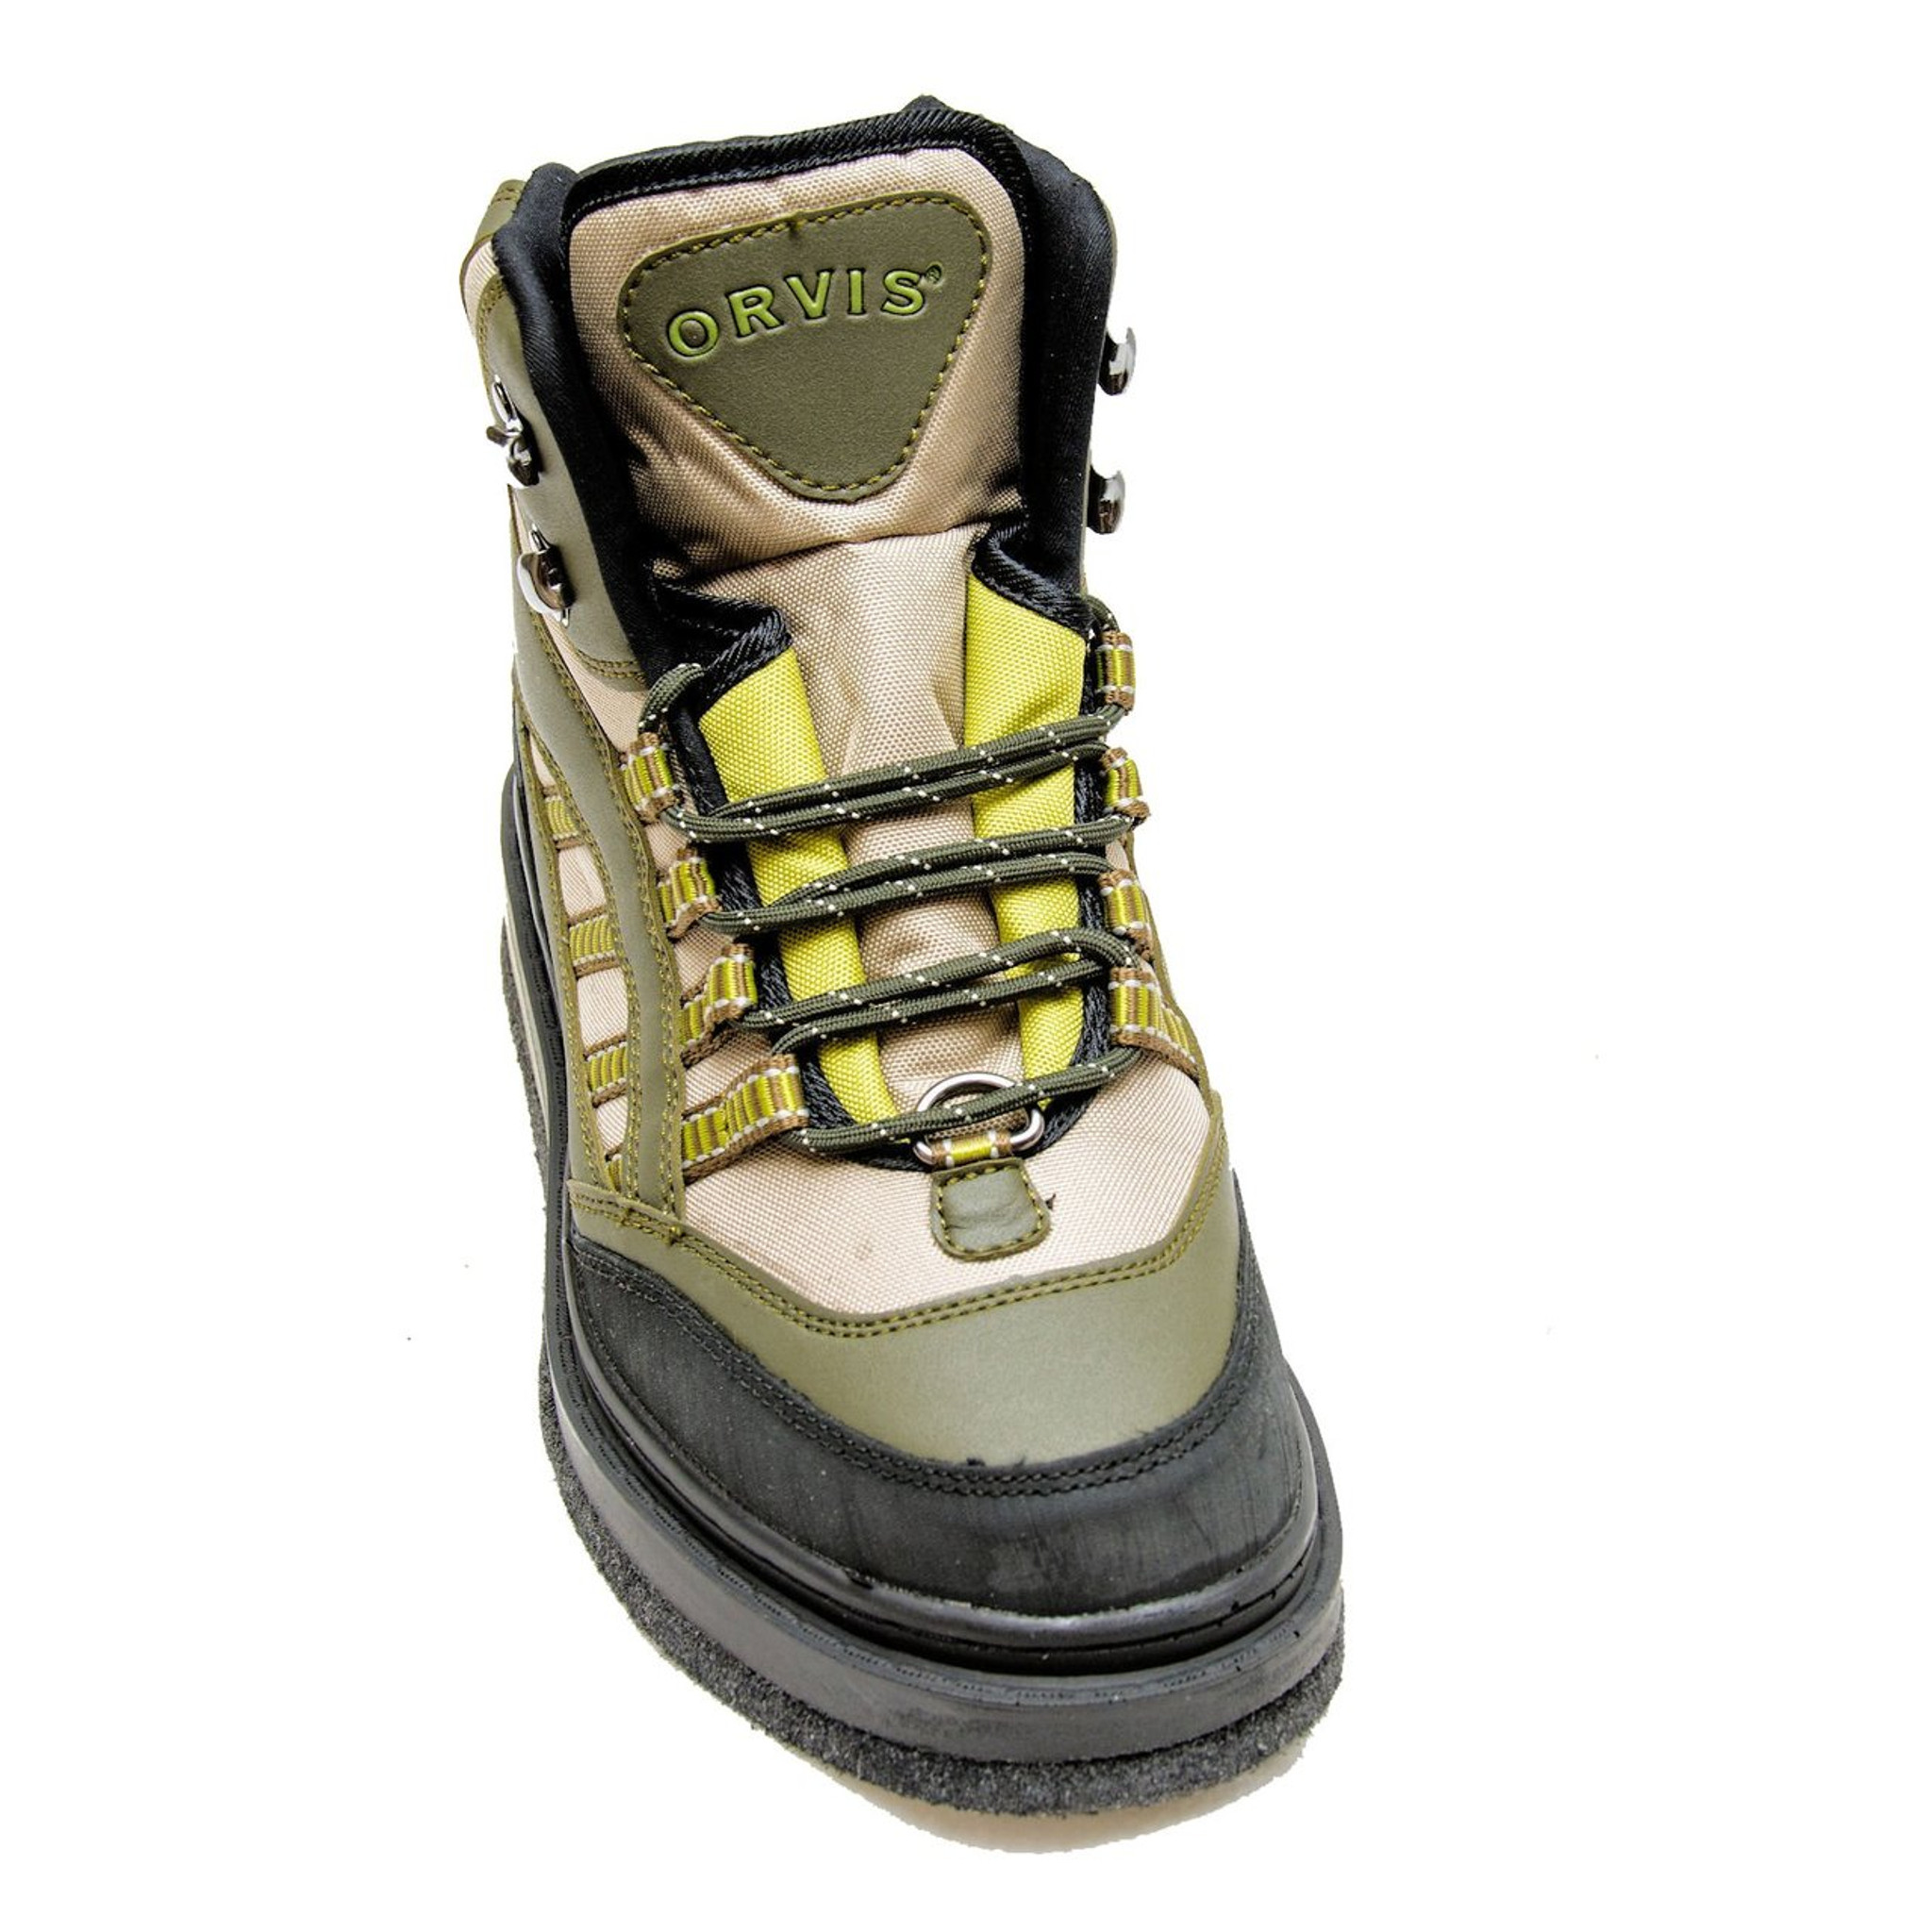 orvis encounter wading boots